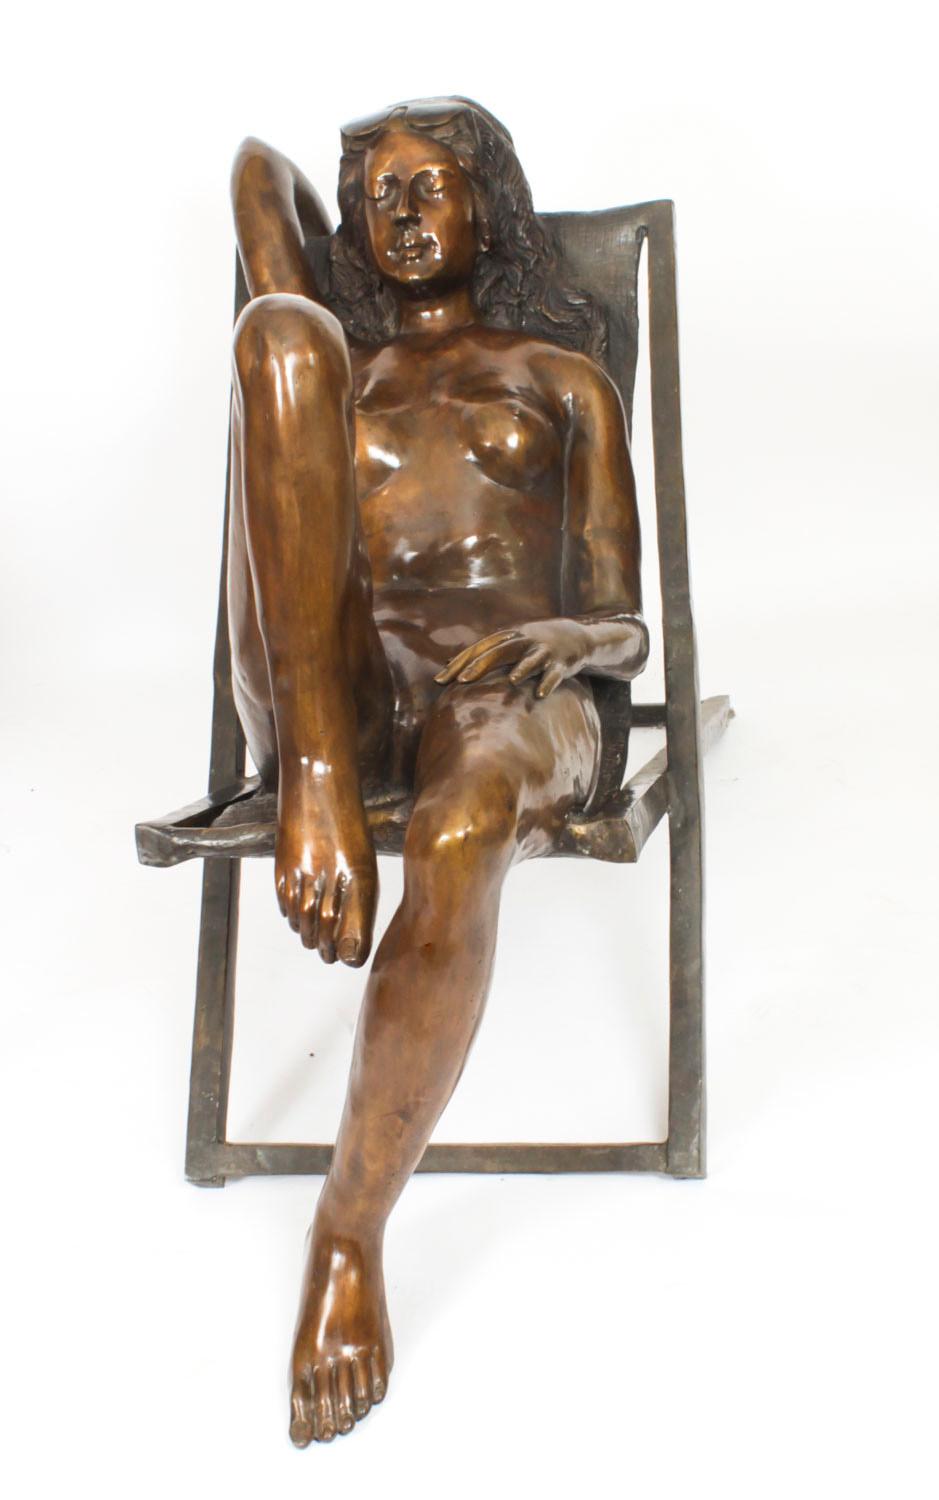 This is a large vintage pair of  nude female figures, late 20th century in date.

The sunbathing nudes are made in bronze using the lost wax method and feature the ladies reclining on deck chairs.

The attention to detail of these beautiful ladies